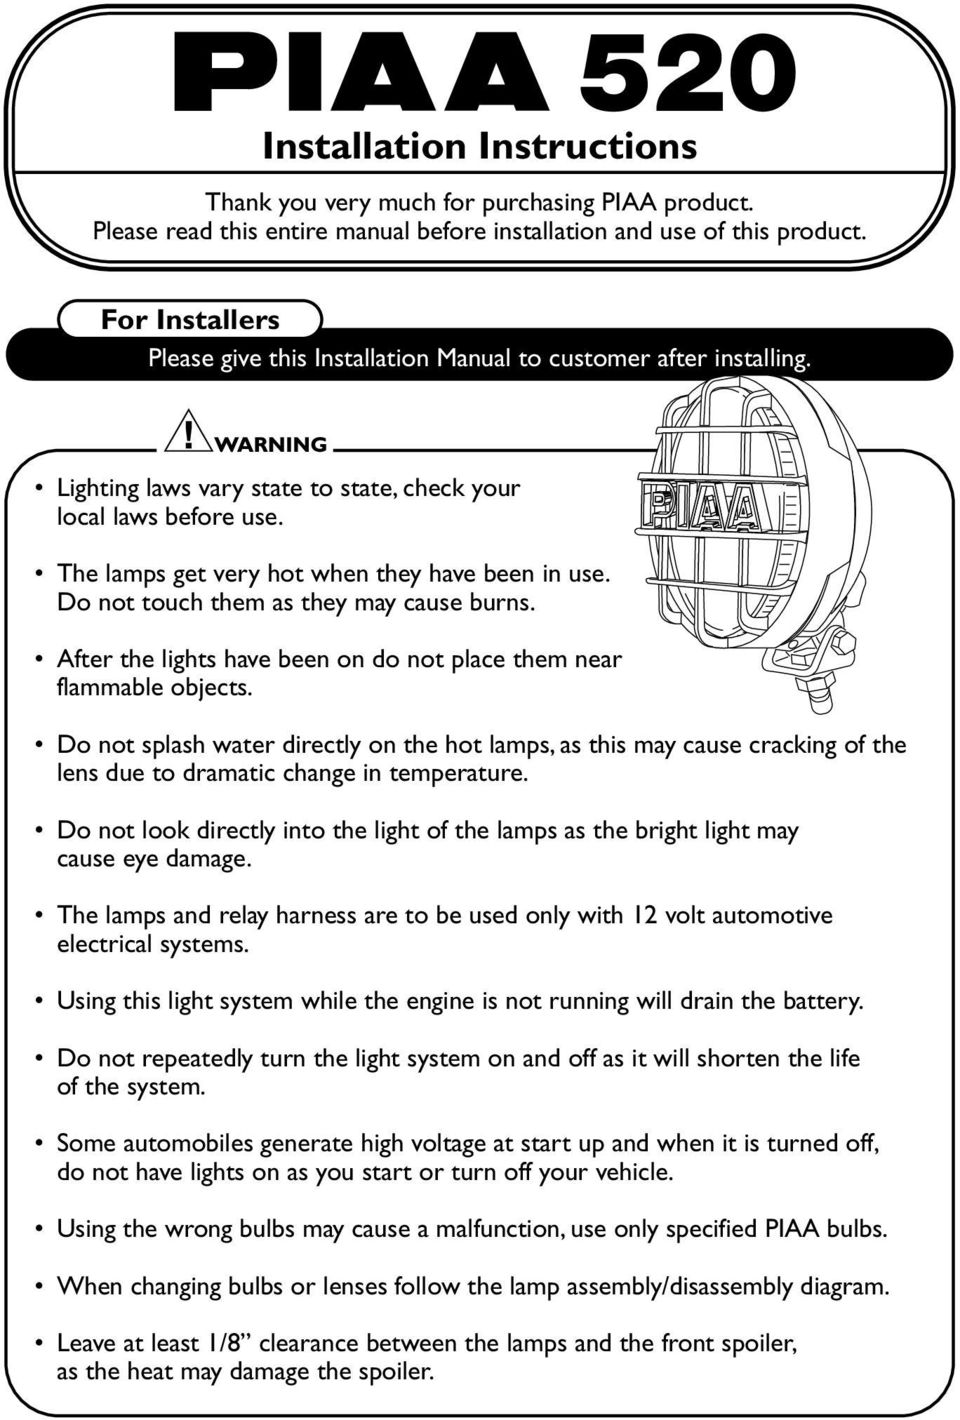 The lamps get very hot when they have been in use. Do not touch them as they may cause burns. After the lights have been on do not place them near flammable objects.